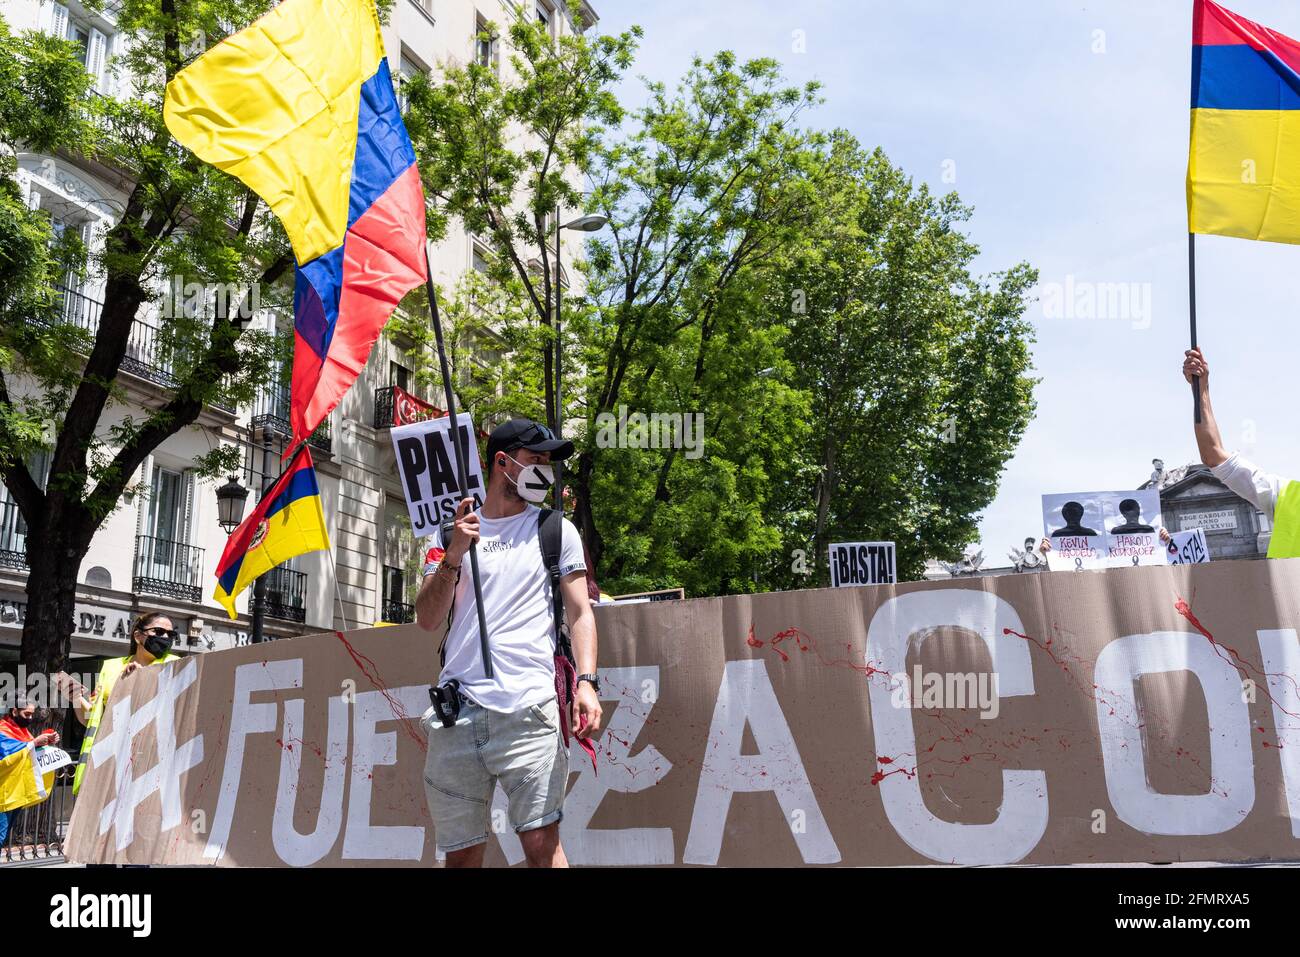 Madrid, Spain, 8th may 2021. Protesters attend a demonstration in support of Colombian citizens fighting violent repression of anti-government protest Stock Photo